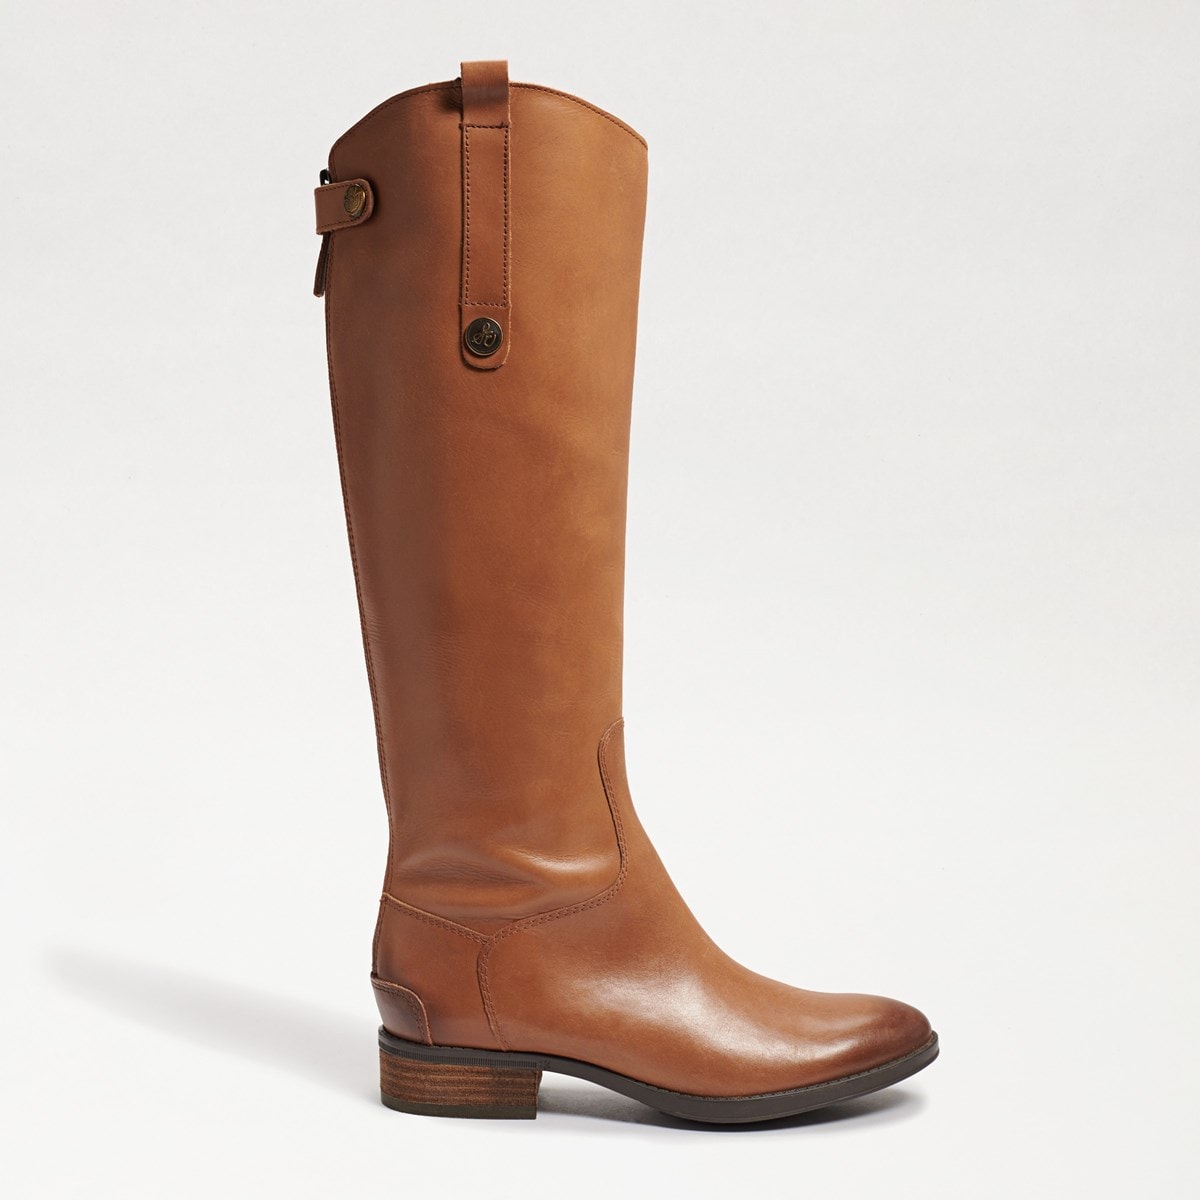 riding boots wide calf fitting